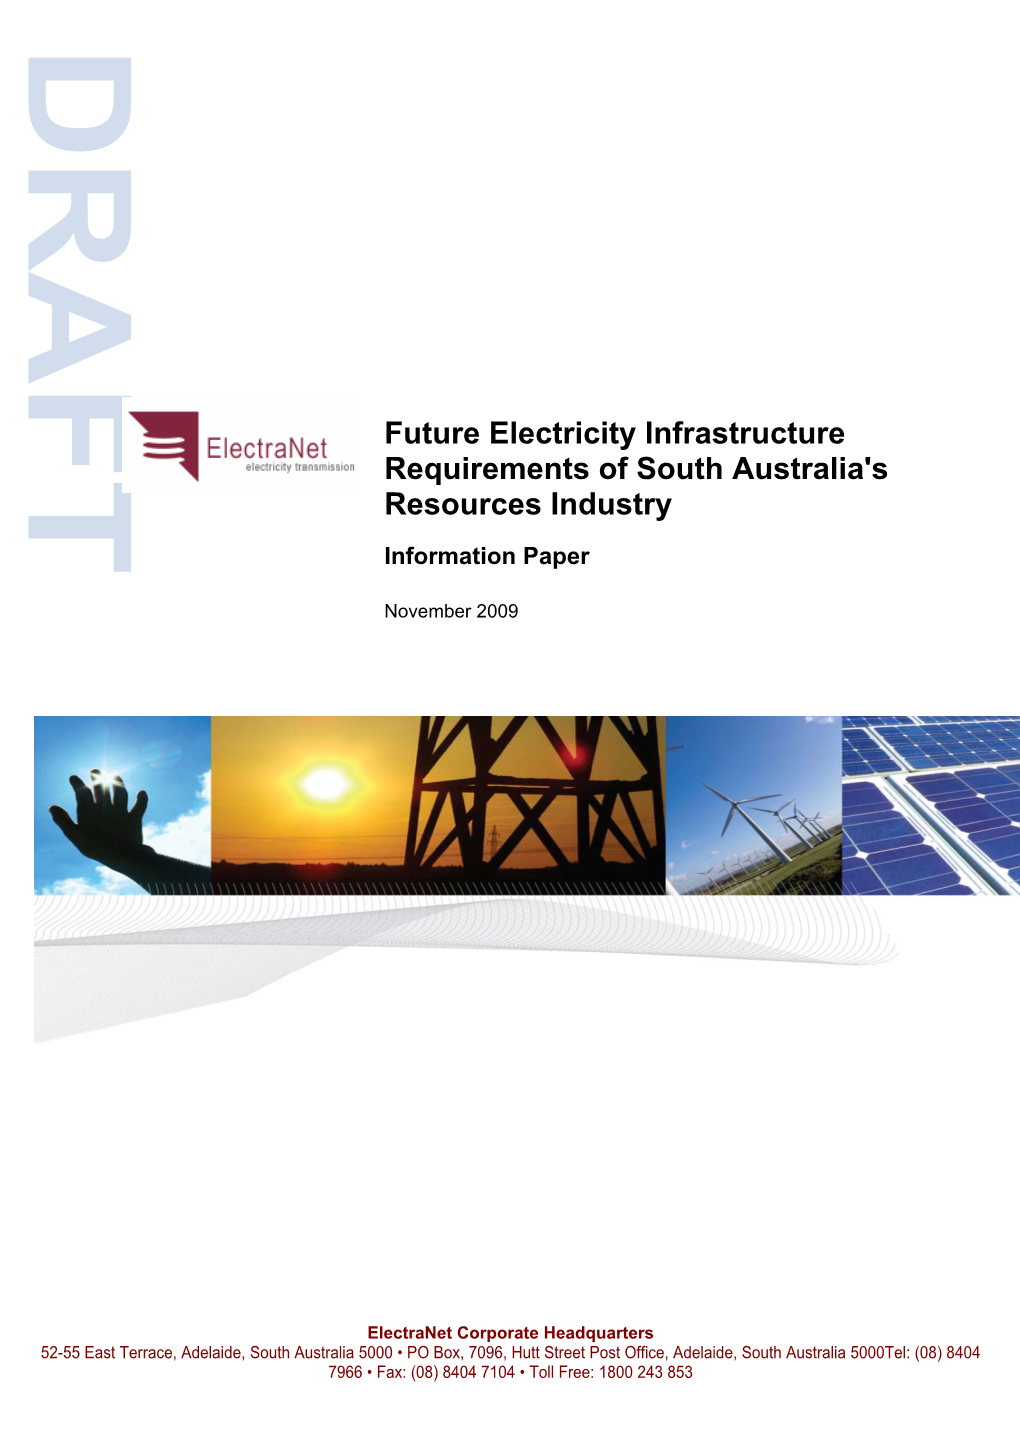 Future Electricity Infrastructure Requirements of South Australia's